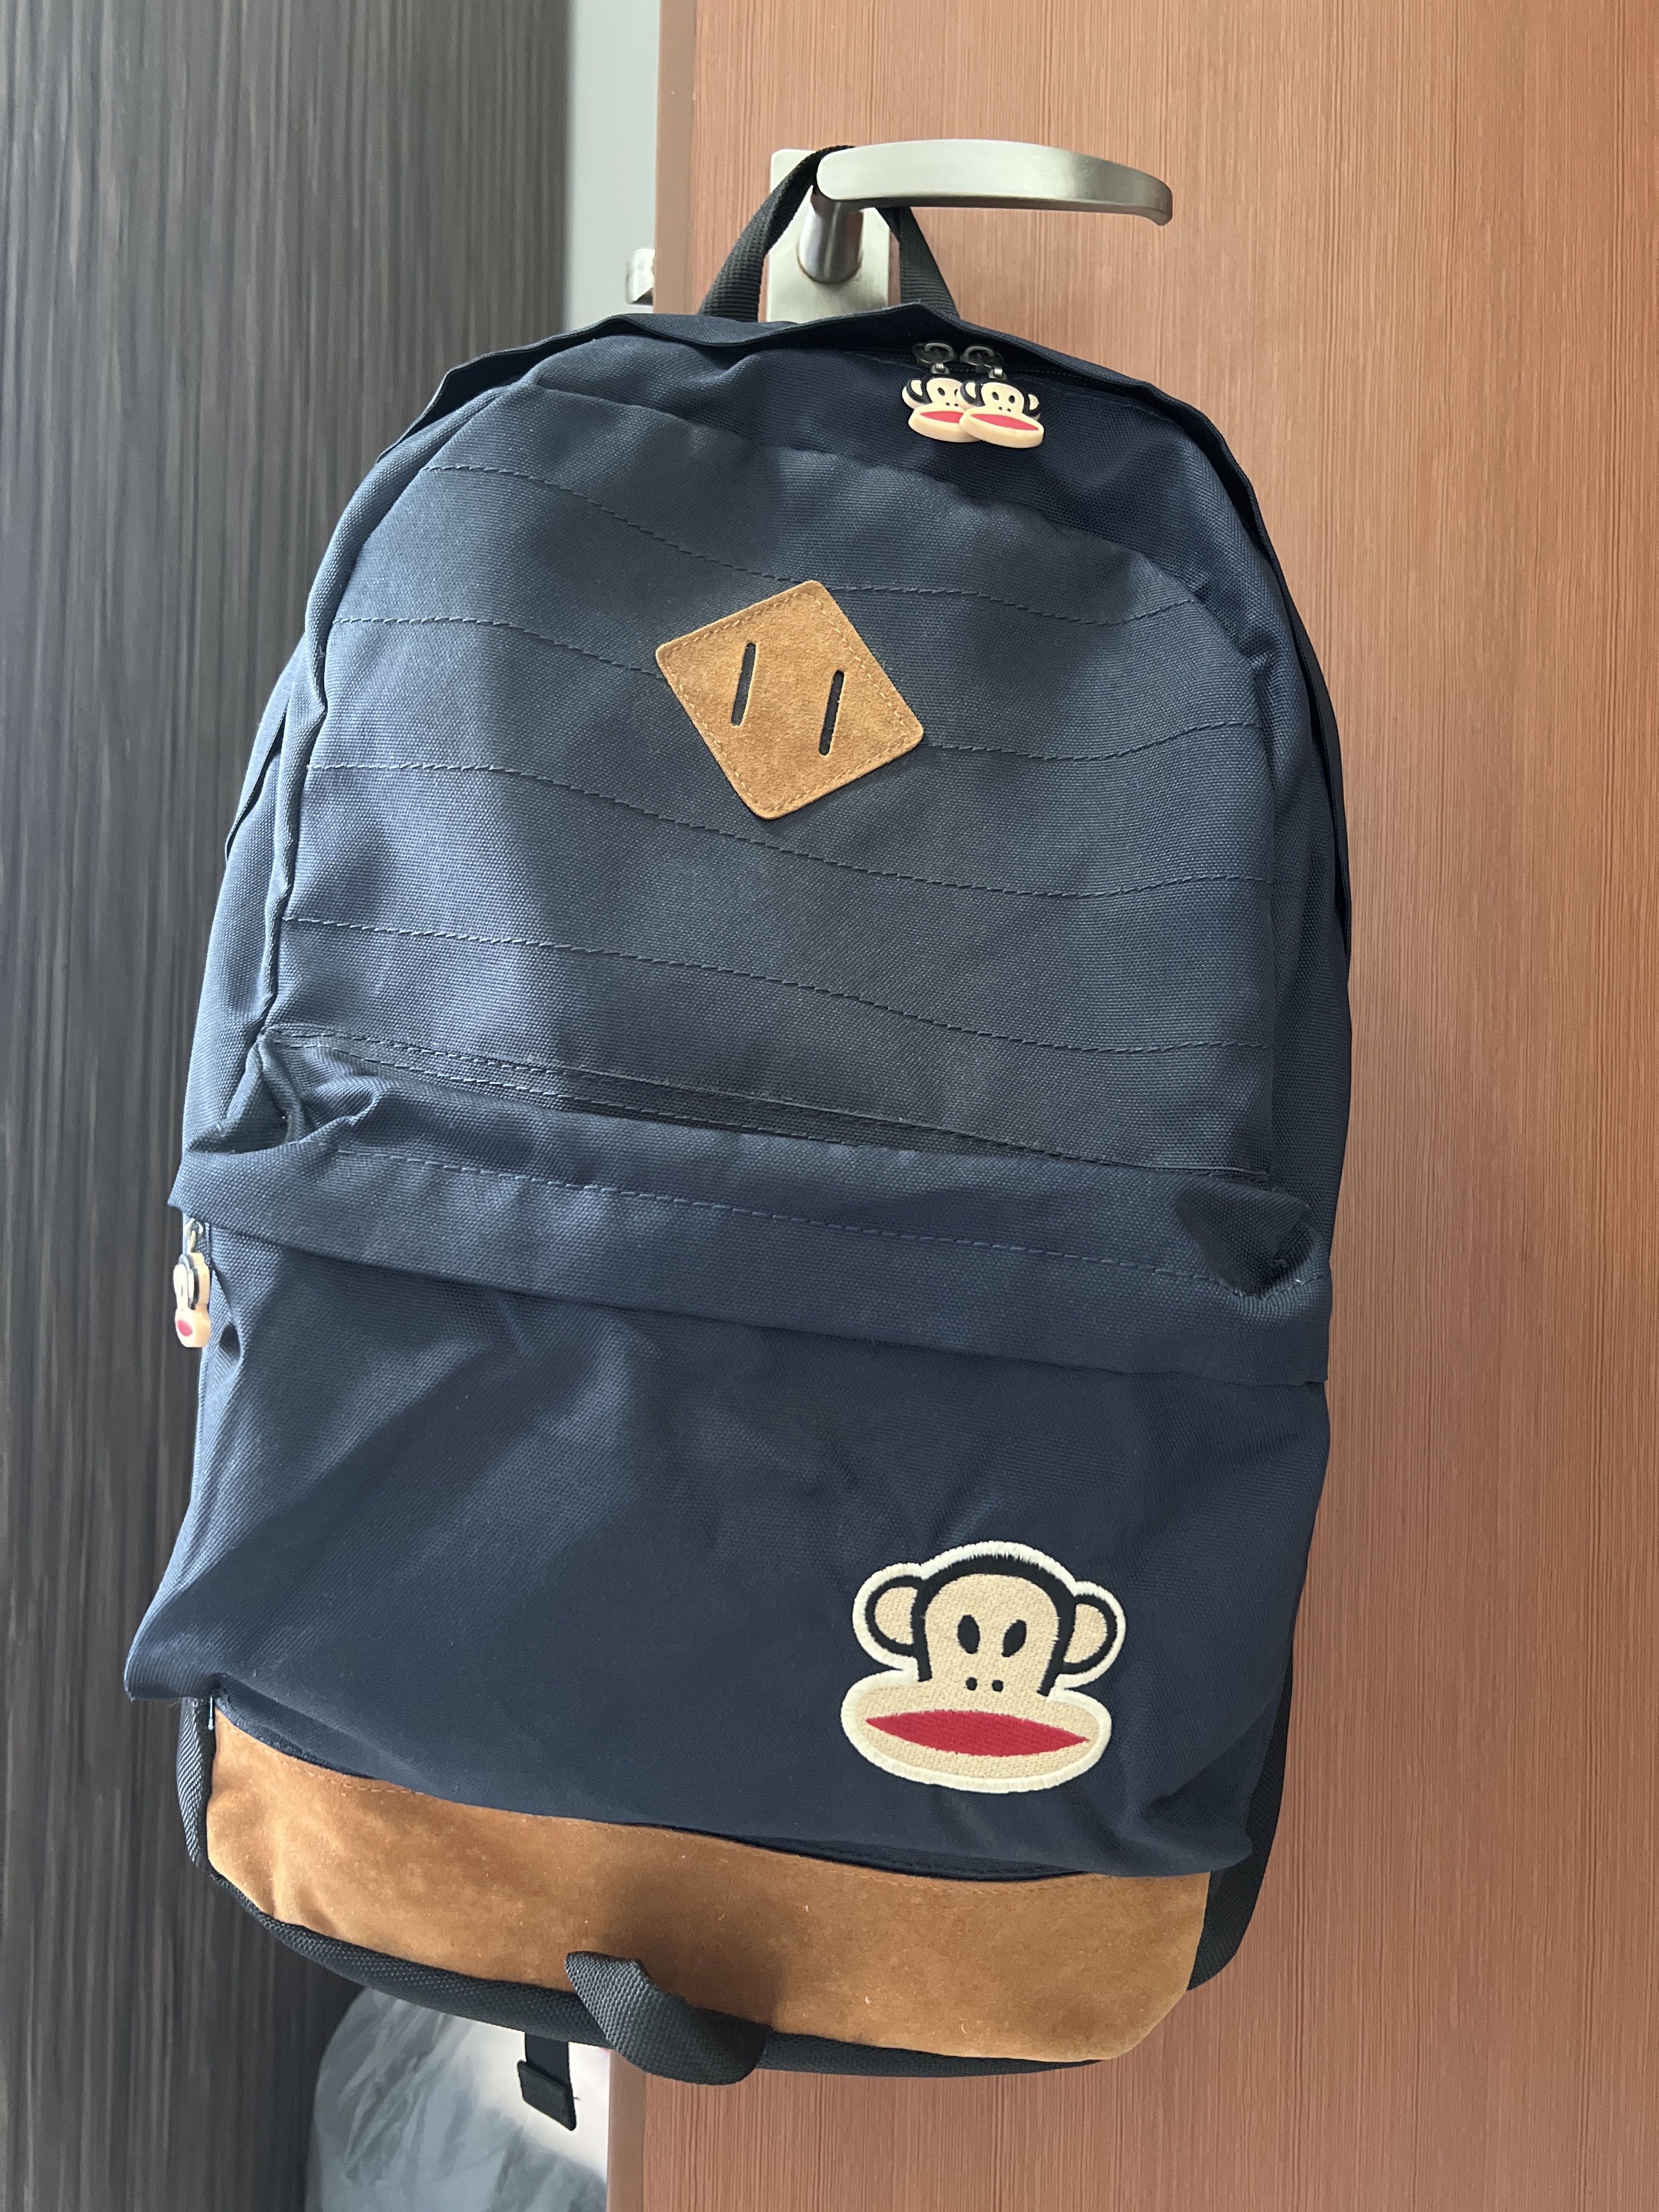 Perch Go mad rough BRAND NEW* Paul Frank school backpack, Hobbies & Toys, Stationery & Craft,  Stationery & School Supplies on Carousell